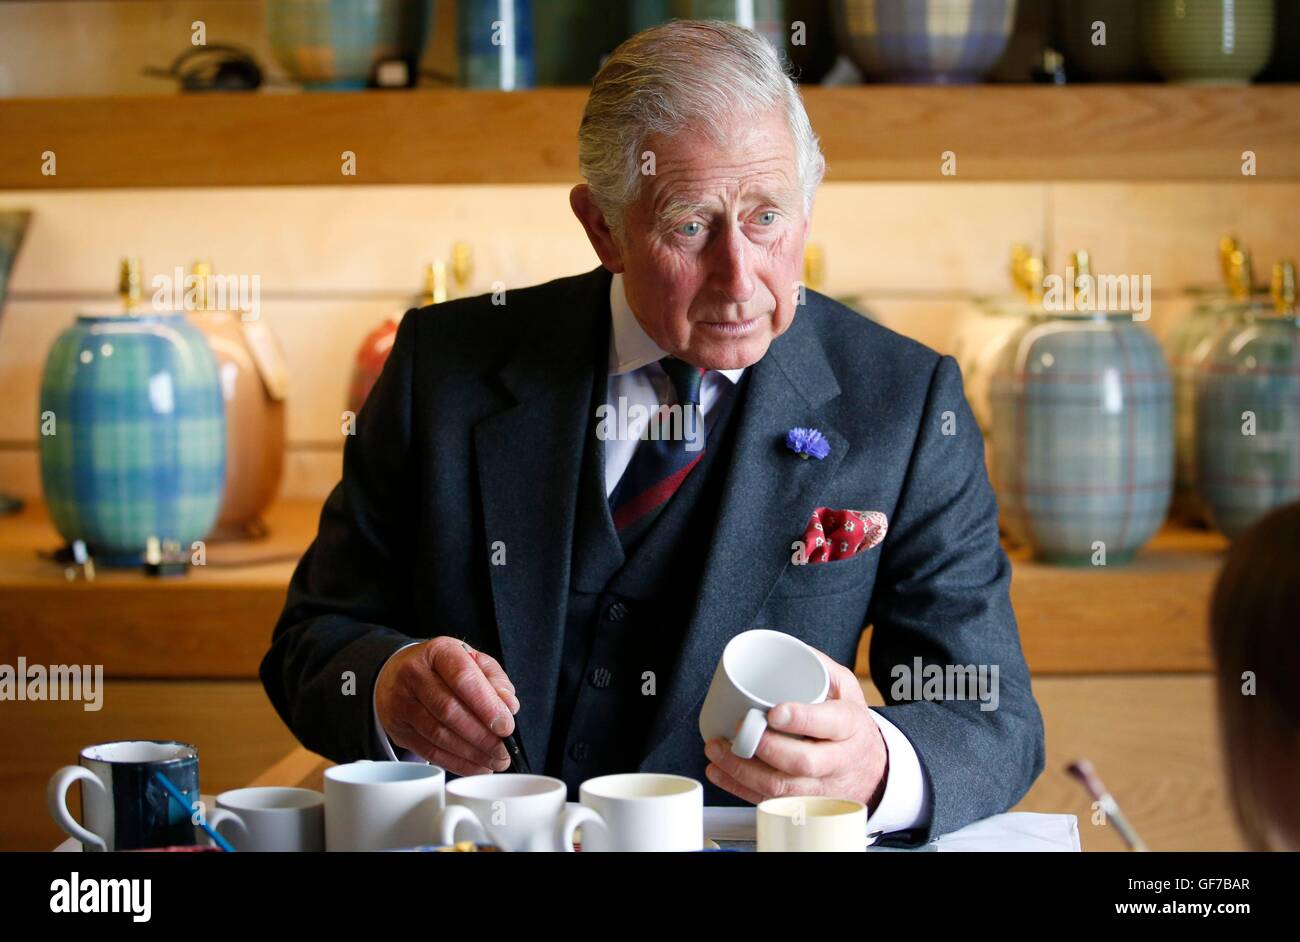 The Prince of Wales, also known as the Duke of Rothesay, paints a mug during a visit to Anta home furnishings in Fearn, Scotland, to see how the business supports traditional craft skills. Stock Photo